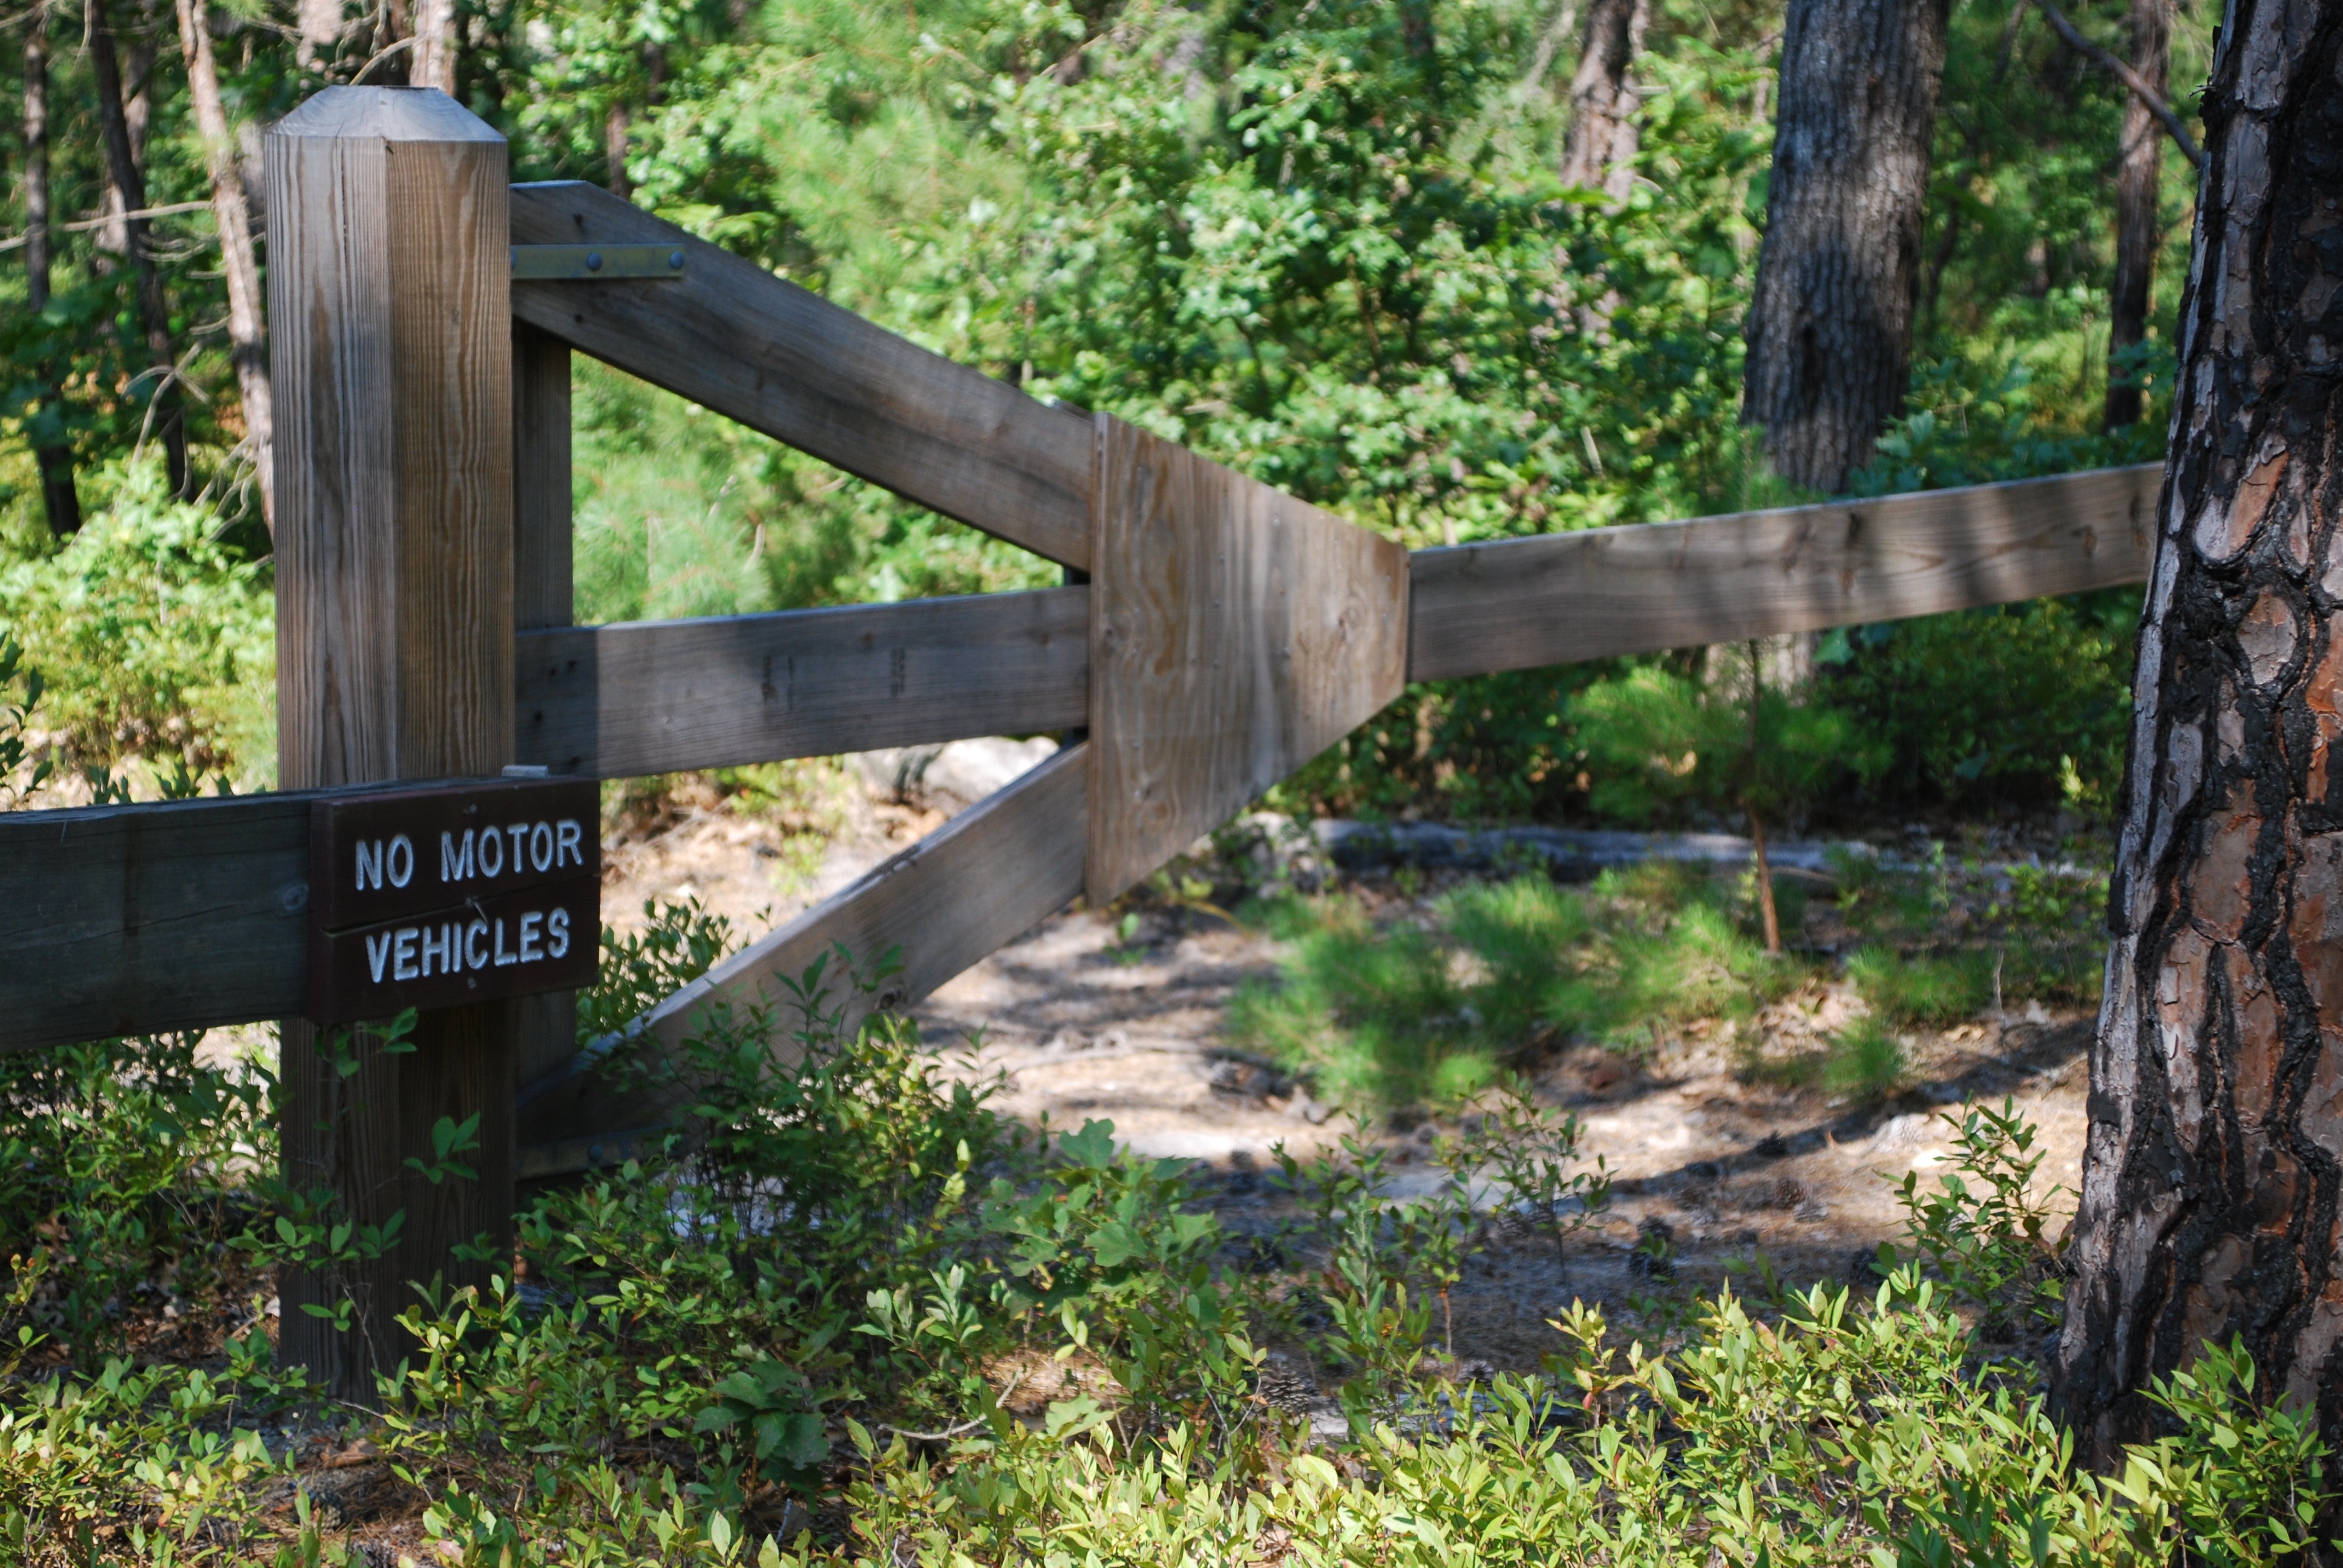 A gate keeps off-road drivers away from the Jemima Mount site